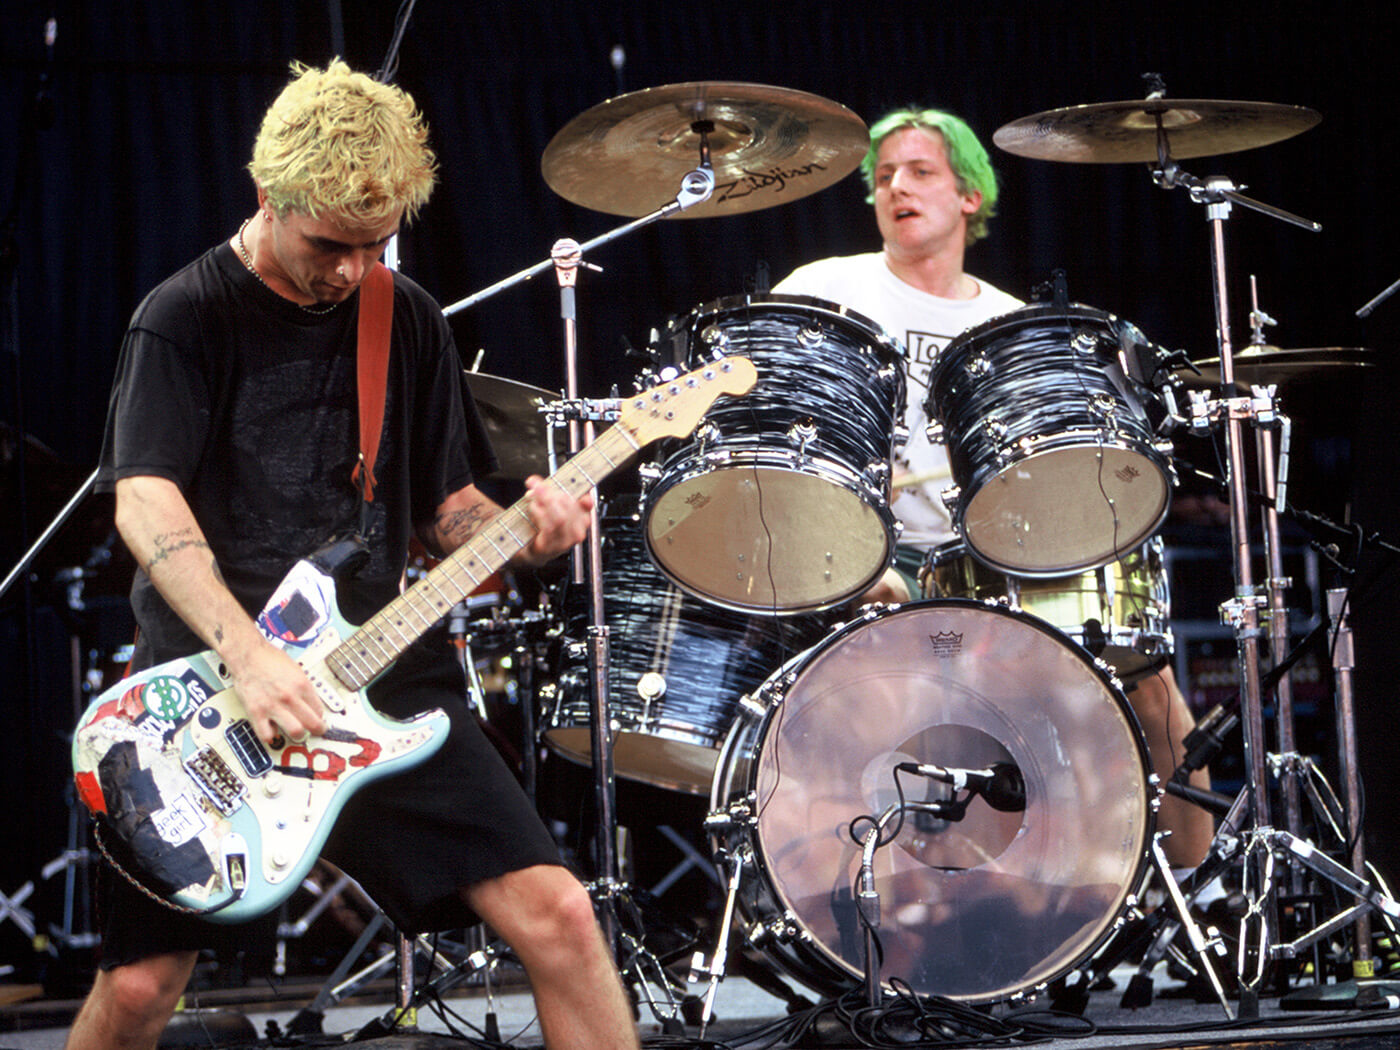 Billie Joe Armstrong (Left) and Tré Cool of Green Day performing at Live 105's BFD 1994 at Shoreline Amphitheater.